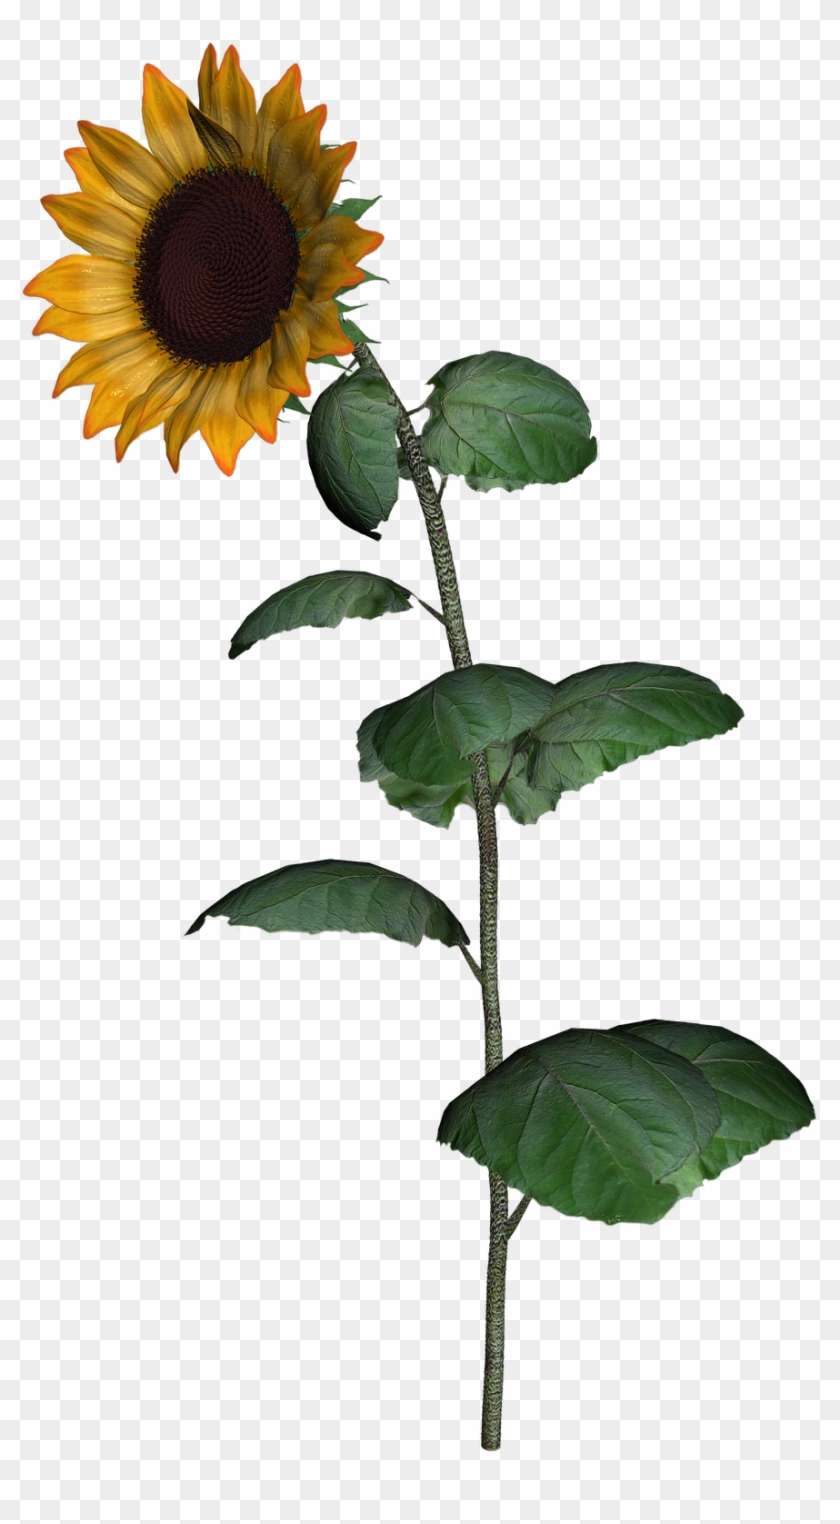 Sunflower Clipart With Leaf Png Images - Sunflower Transparent Png #596713